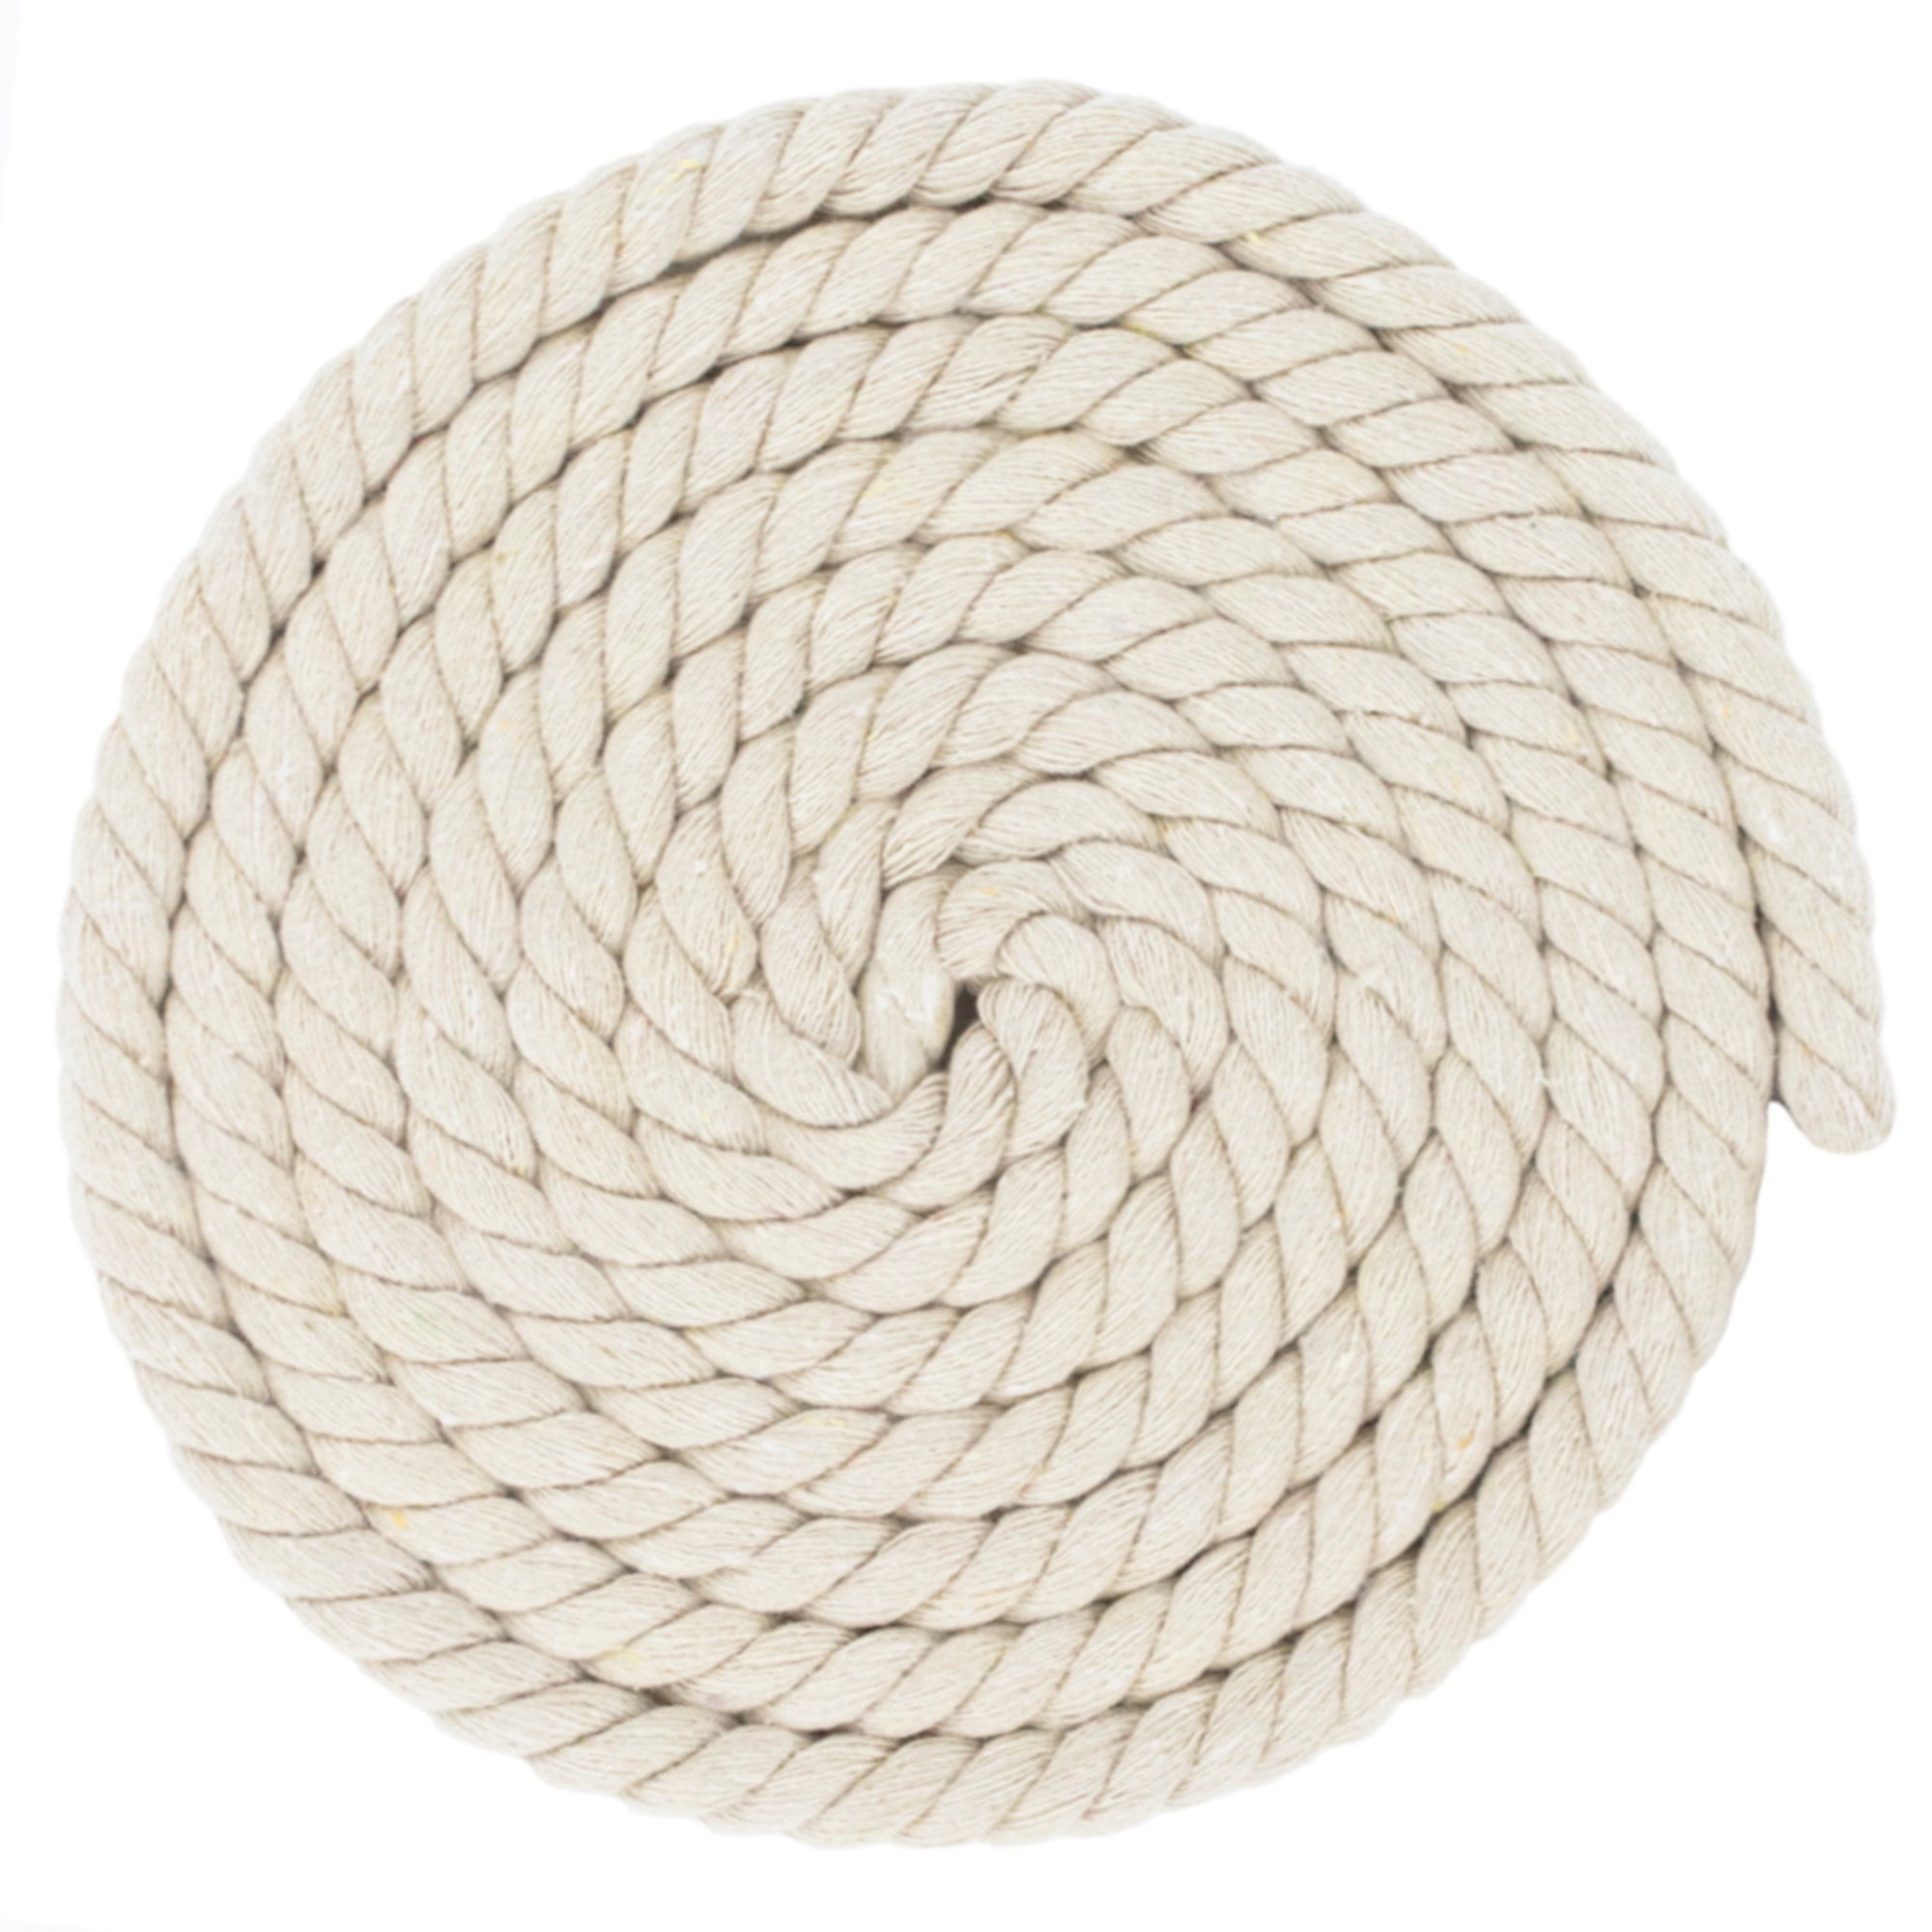 1 Inch Diameters 3/4 Super Soft White and Assorted Colors 50 Black, 1/4 Inch x 50 Feet 1/4 West Coast Paracord Twisted 3 Strand Natural Cotton Rope Artisan Cord 100 Feet 25 5/8 1/2 10 